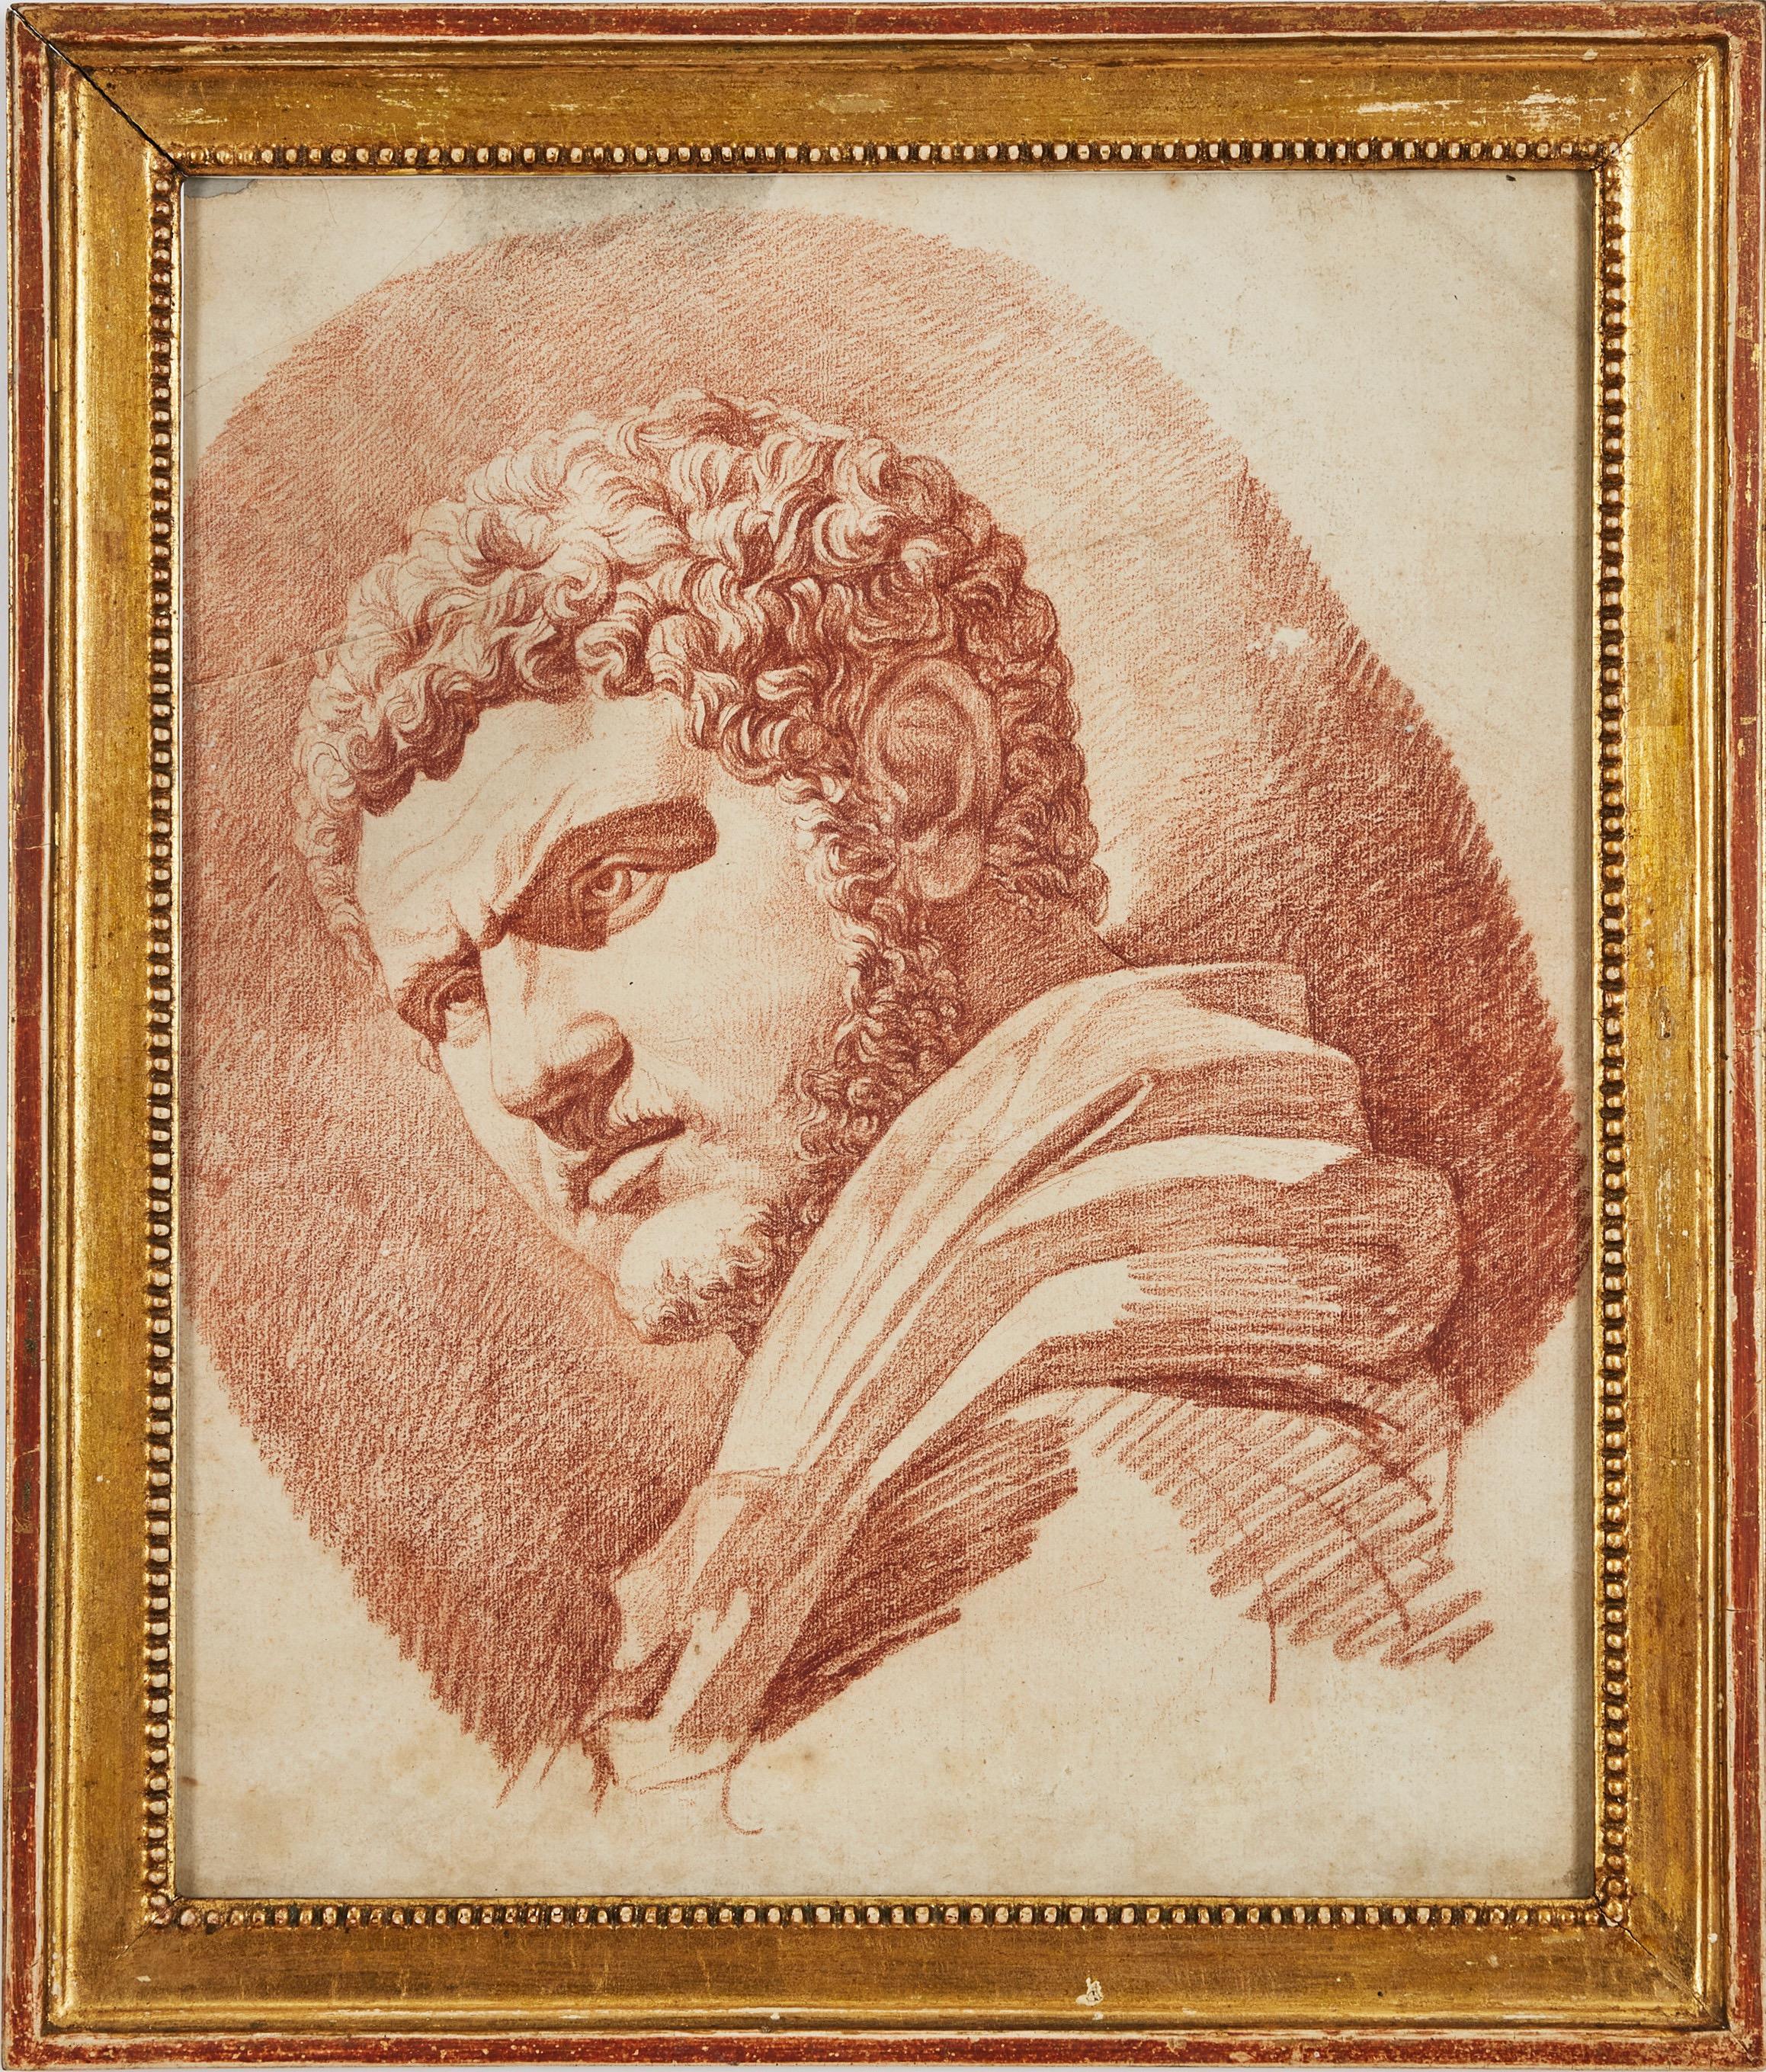 An 18th century study drawing of a bust depicting Caracalla, possibly executed by Johan Tobias Sergel during his Roman period. Red chalk on paper with watermarks, (drawing without frame 49 x 39 cm) , mounted in a Gustavian frame, probably original,